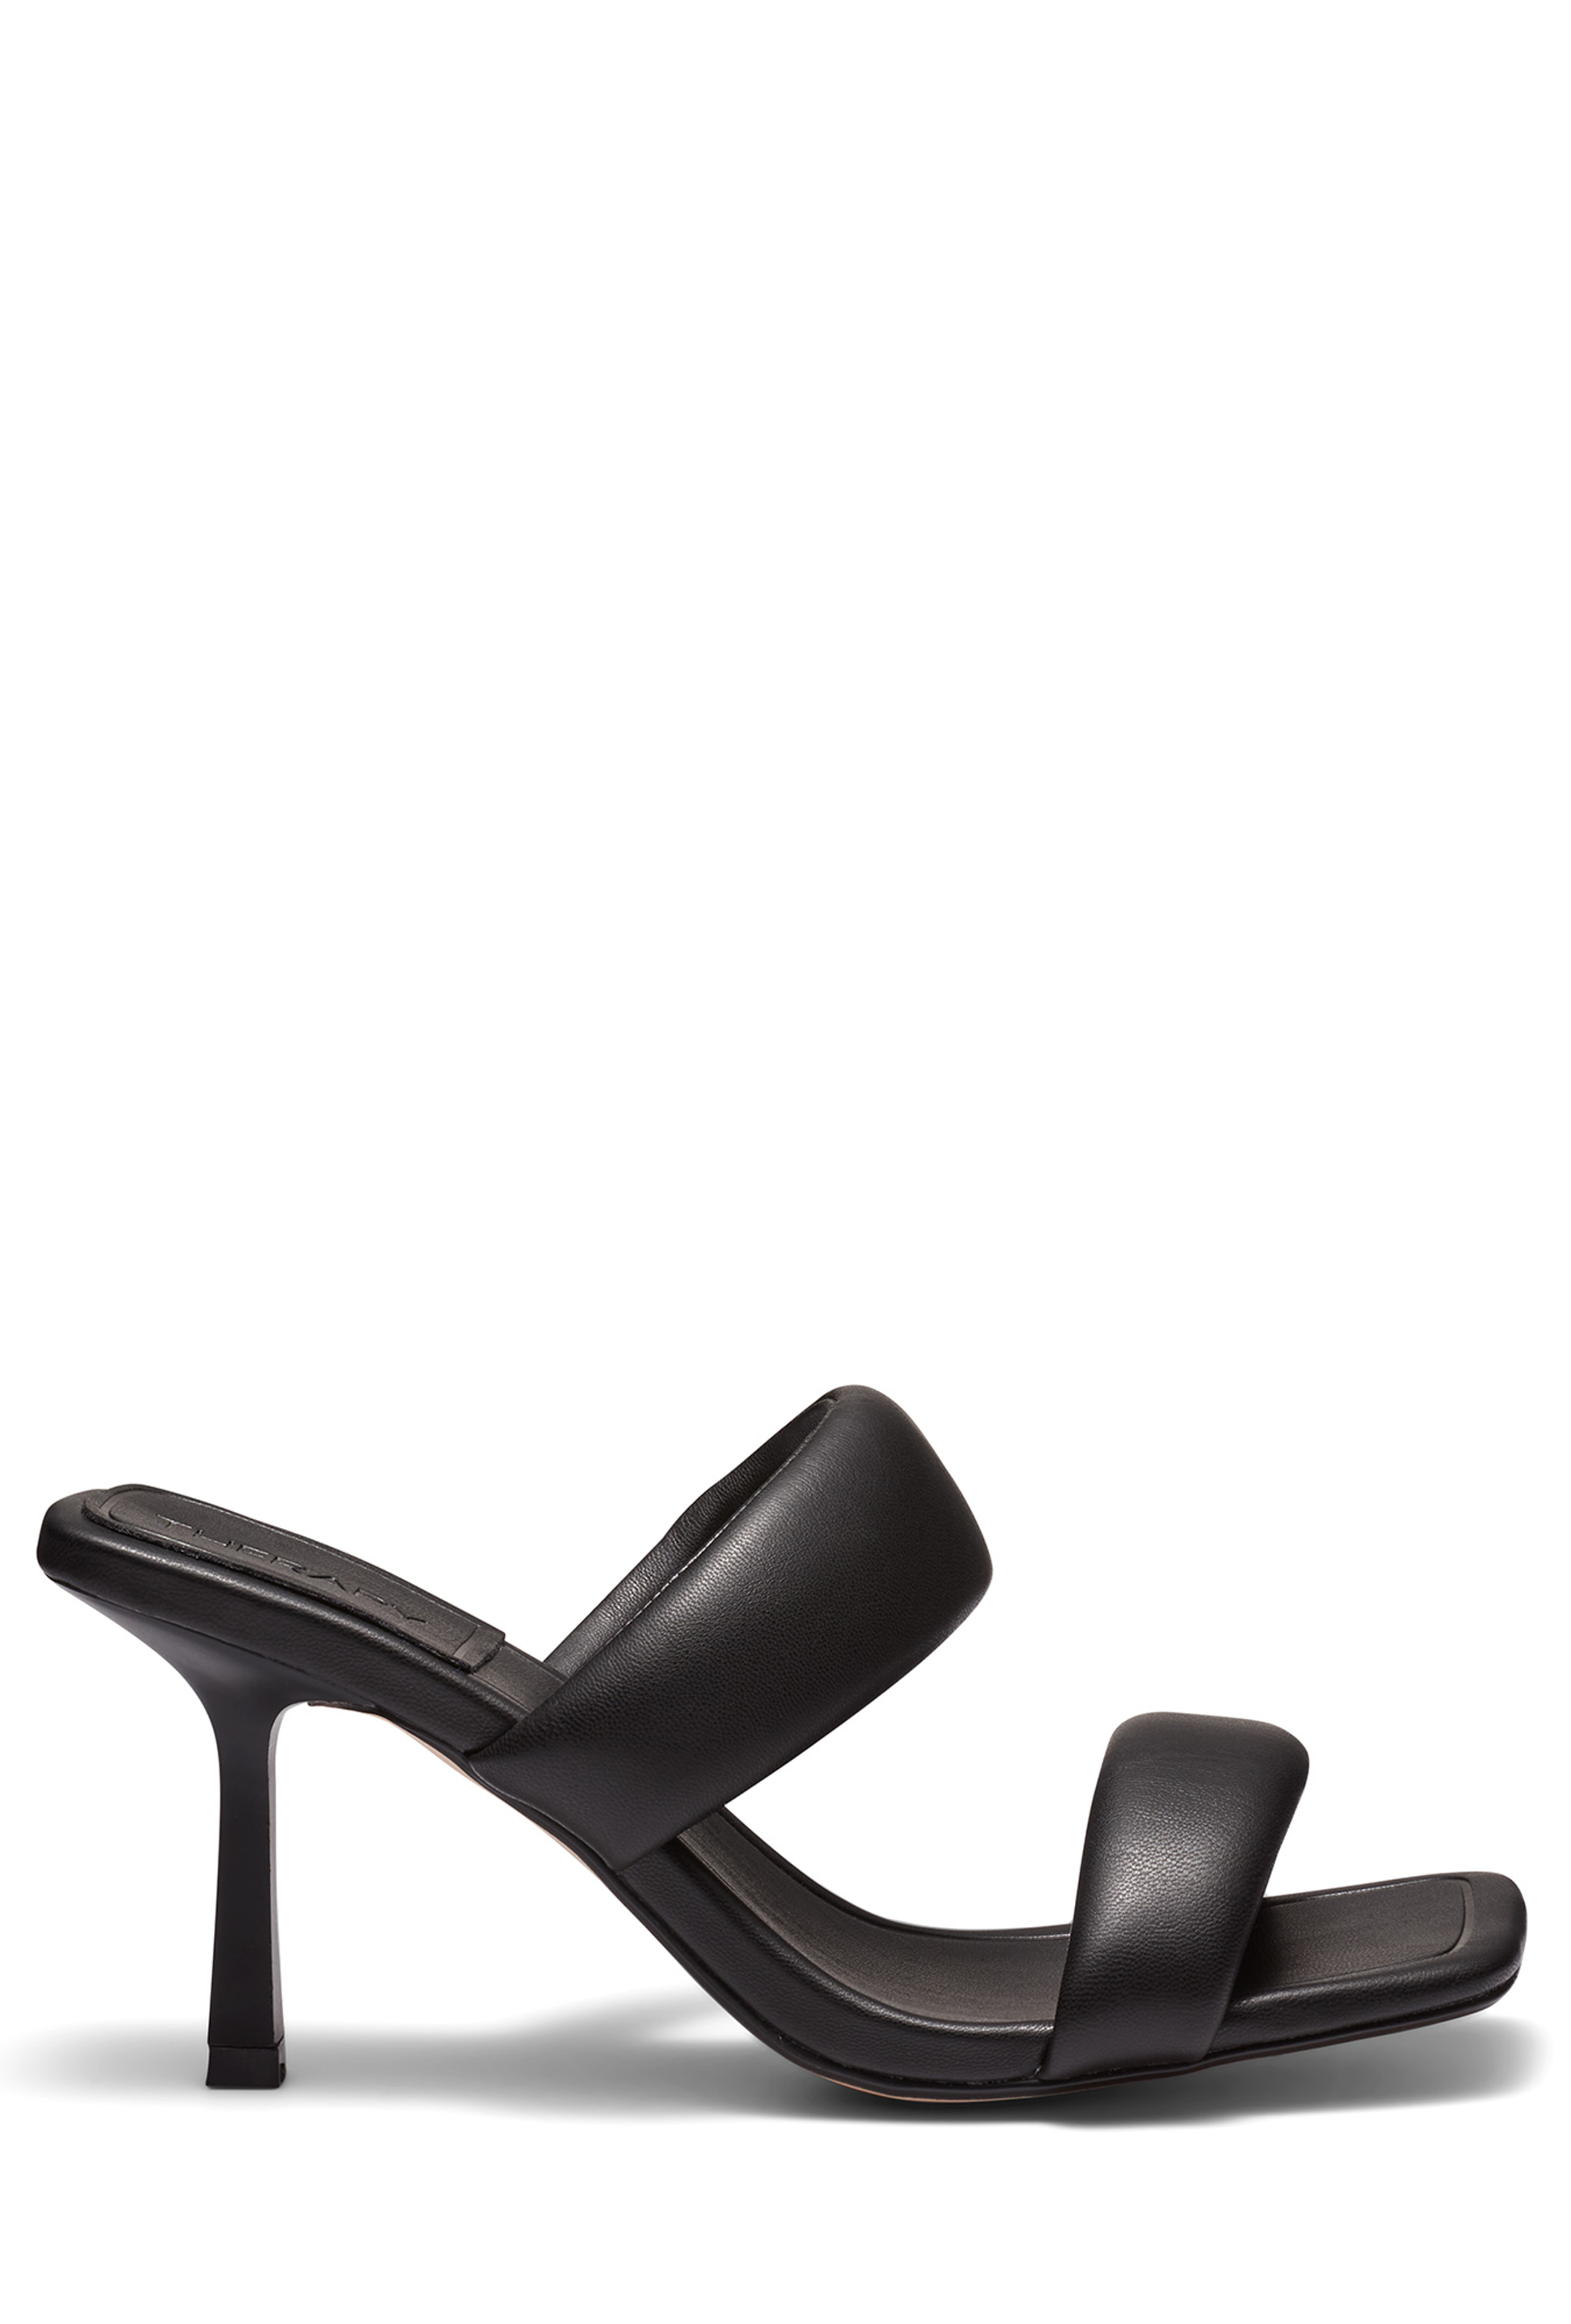 THERAPY Dolla Heels Shoes - Black